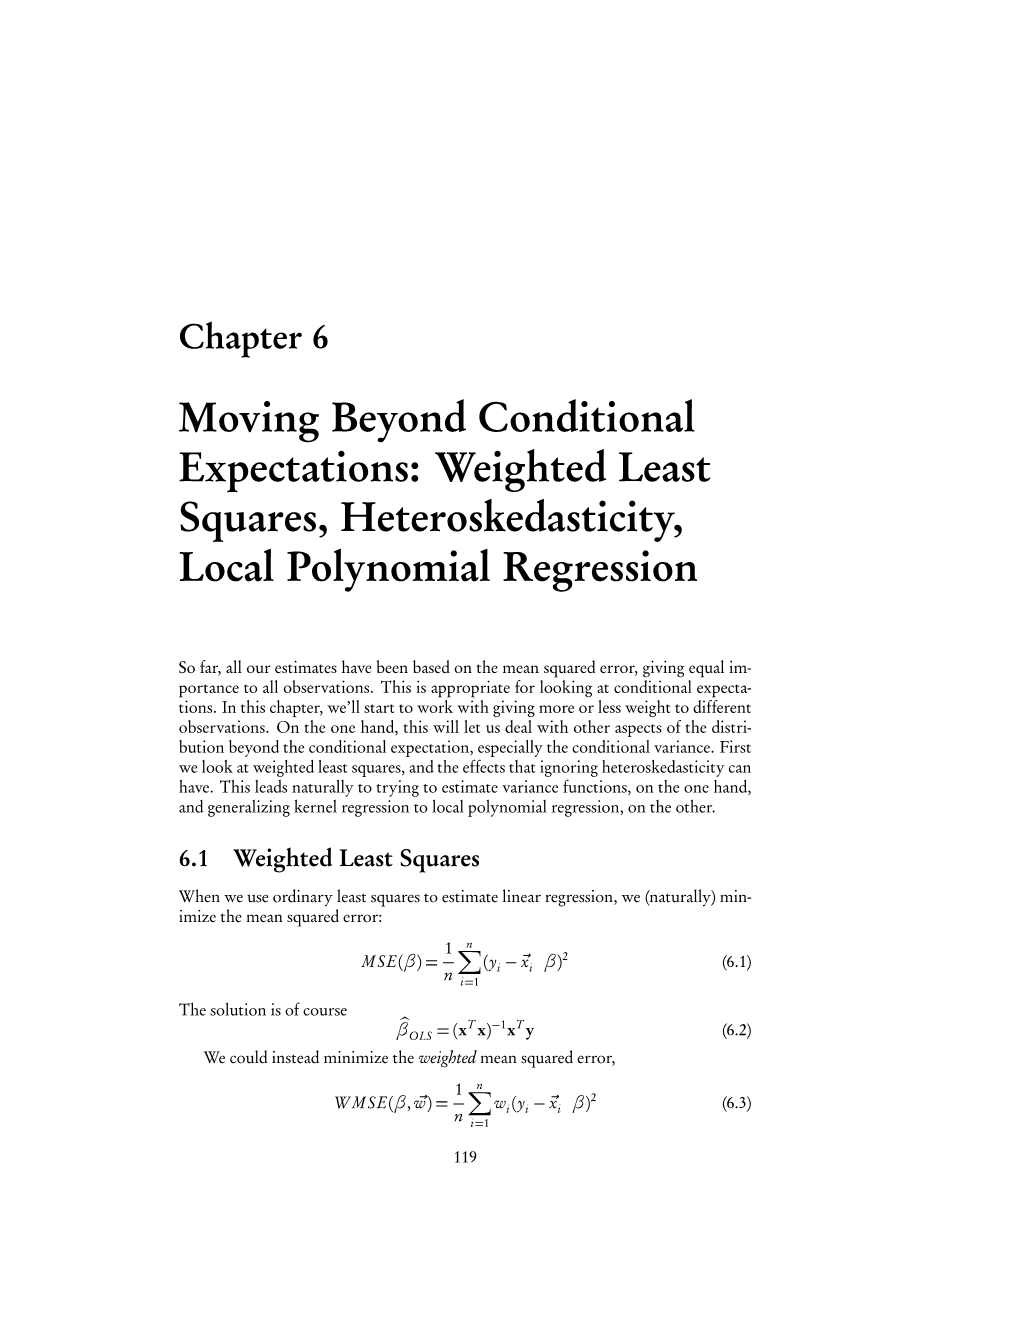 Weighted Least Squares, Heteroskedasticity, Local Polynomial Regression